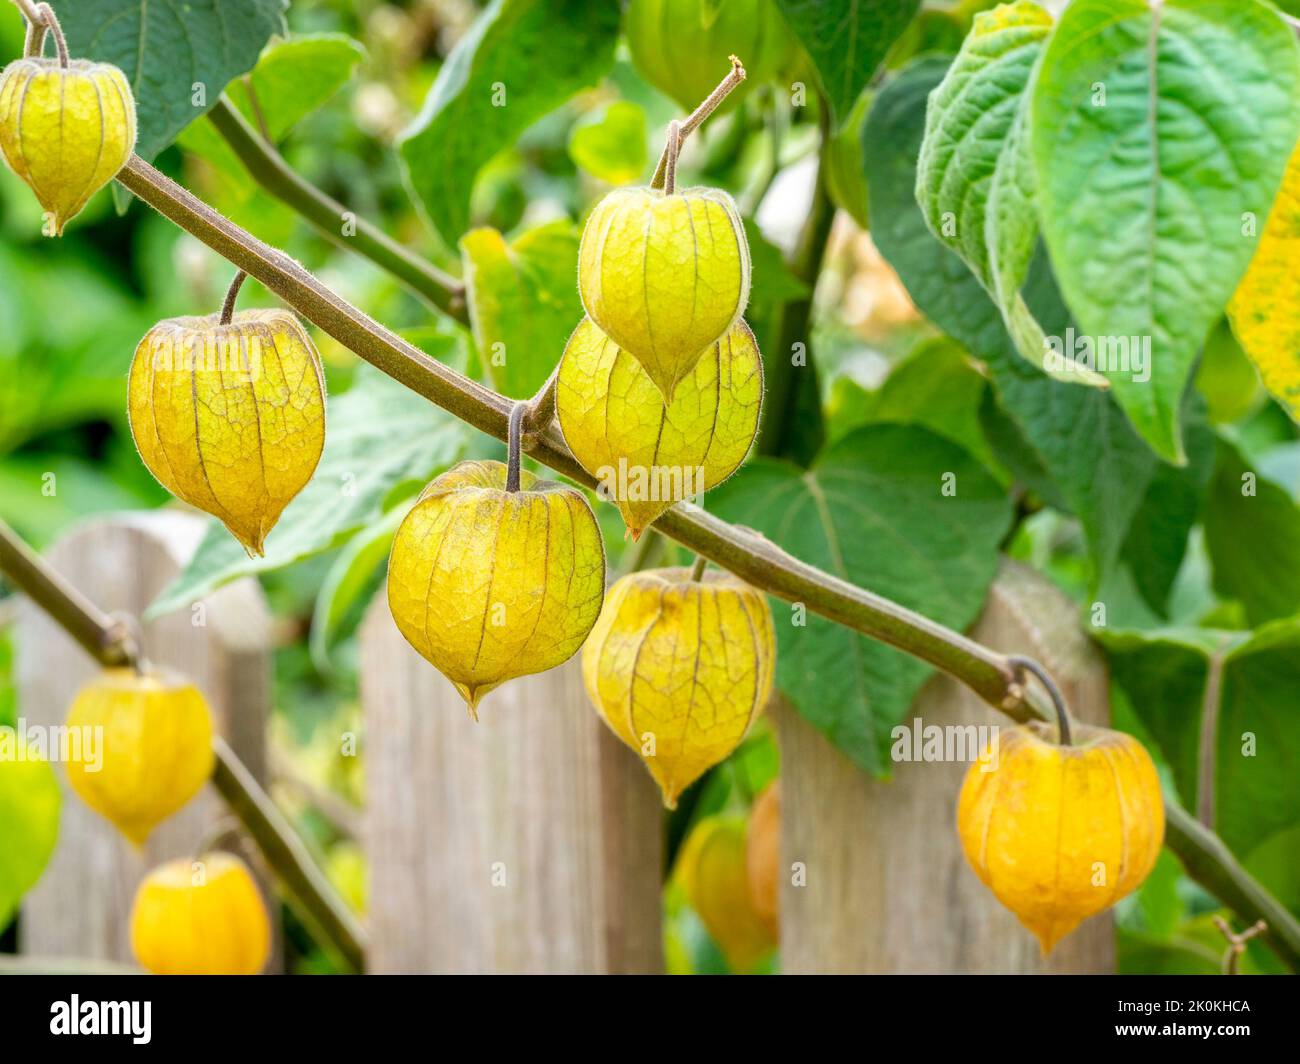 detail of Cape gooseberry or goldenberry fruits (Physalis peruviana) with blurred background - Physalis plant Stock Photo